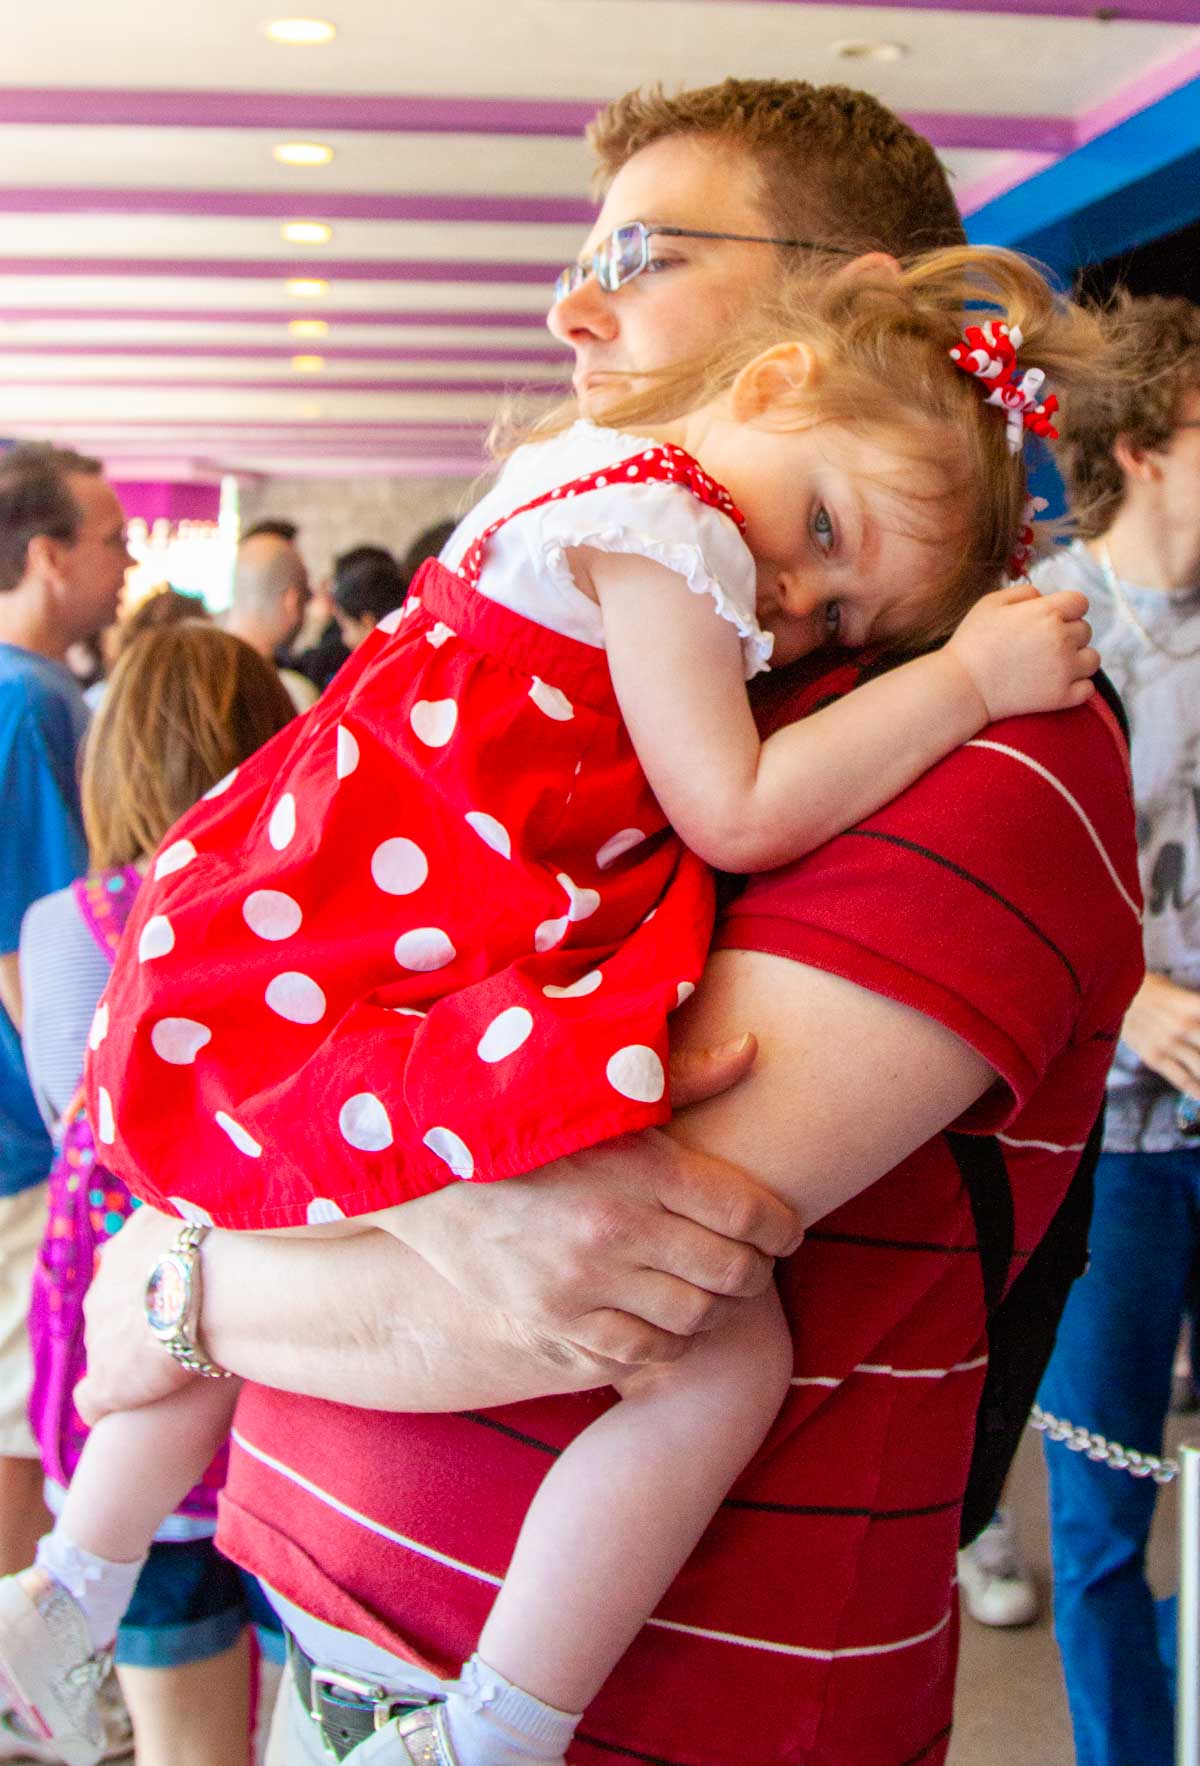 A dad holds his very tired toddler while waiting in line at Disney.